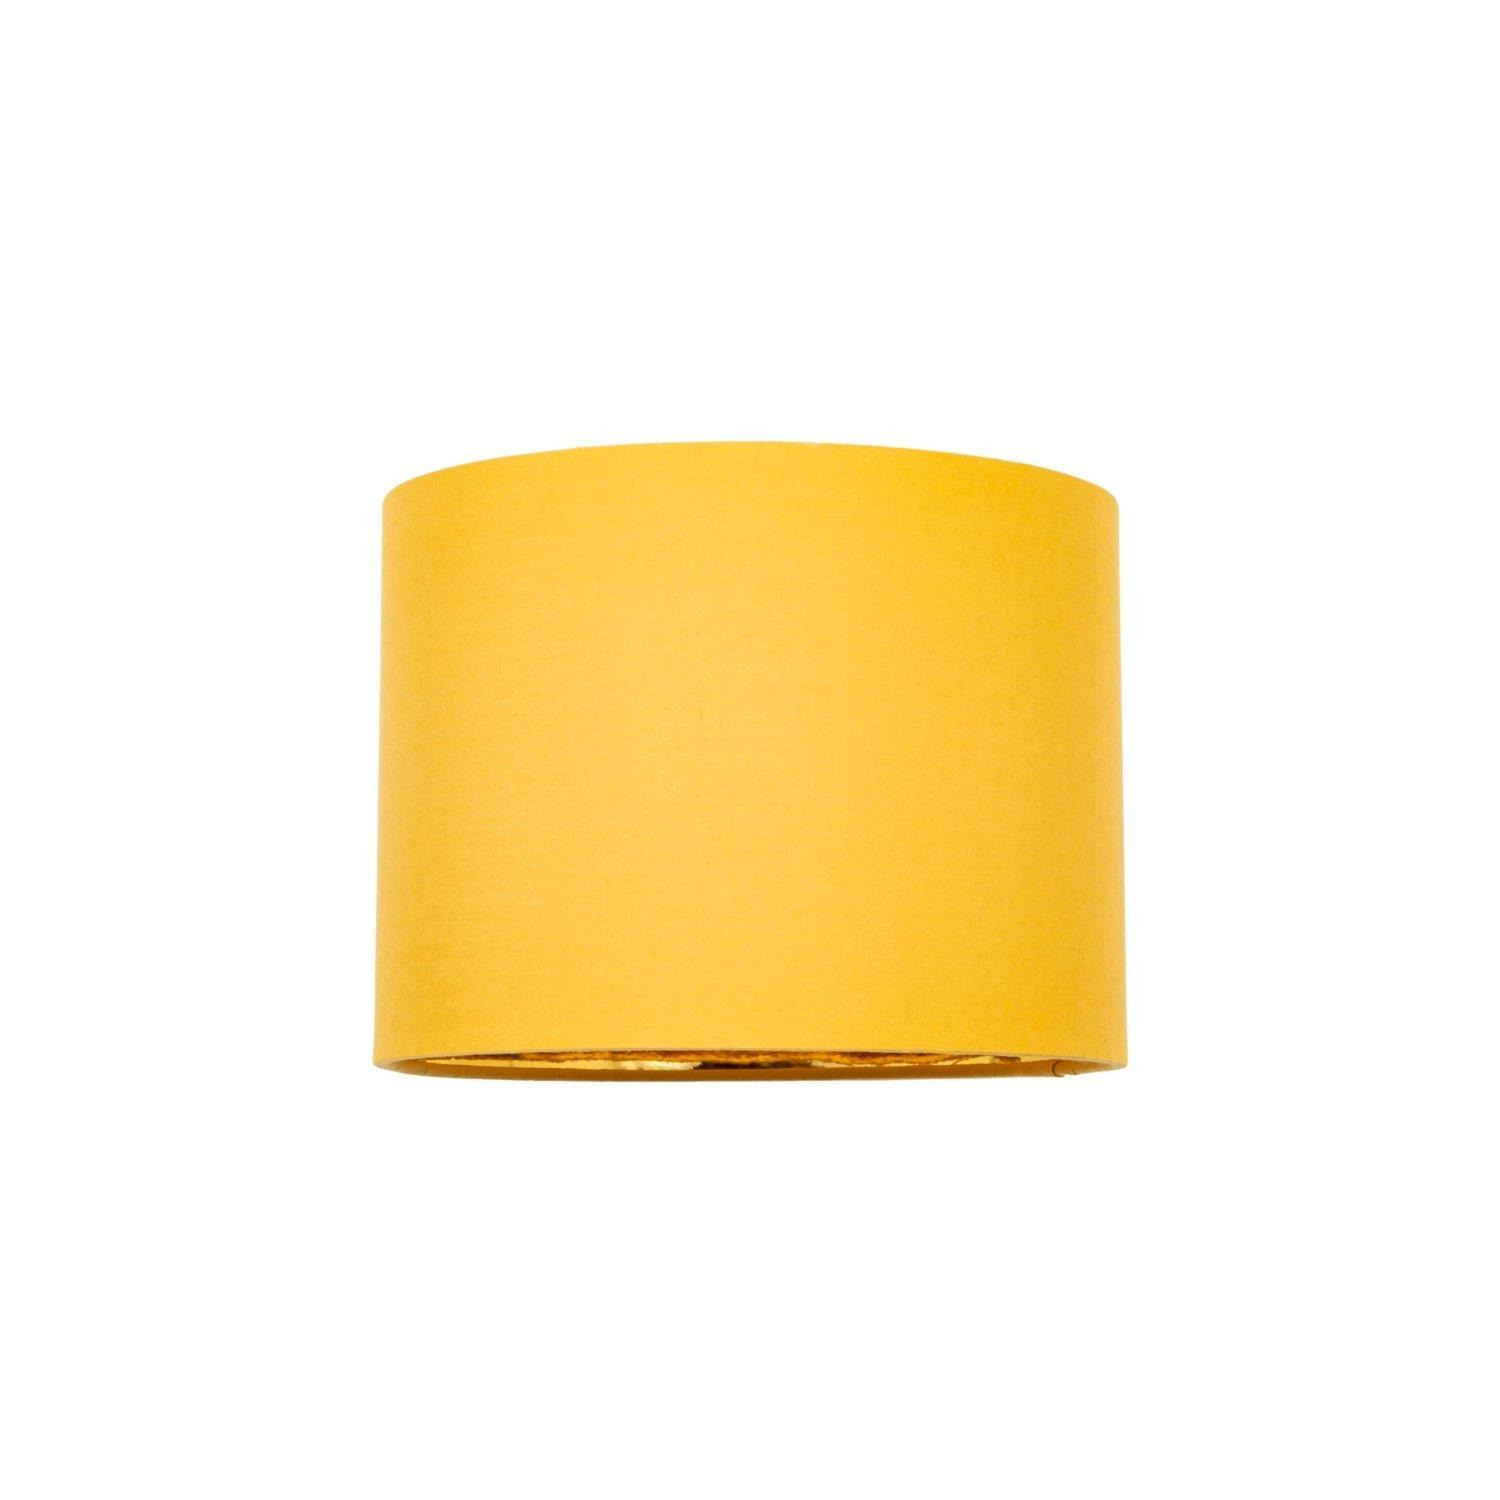 Contemporary Cotton Lamp/Light Shade with Shiny Paper Inner - image 1